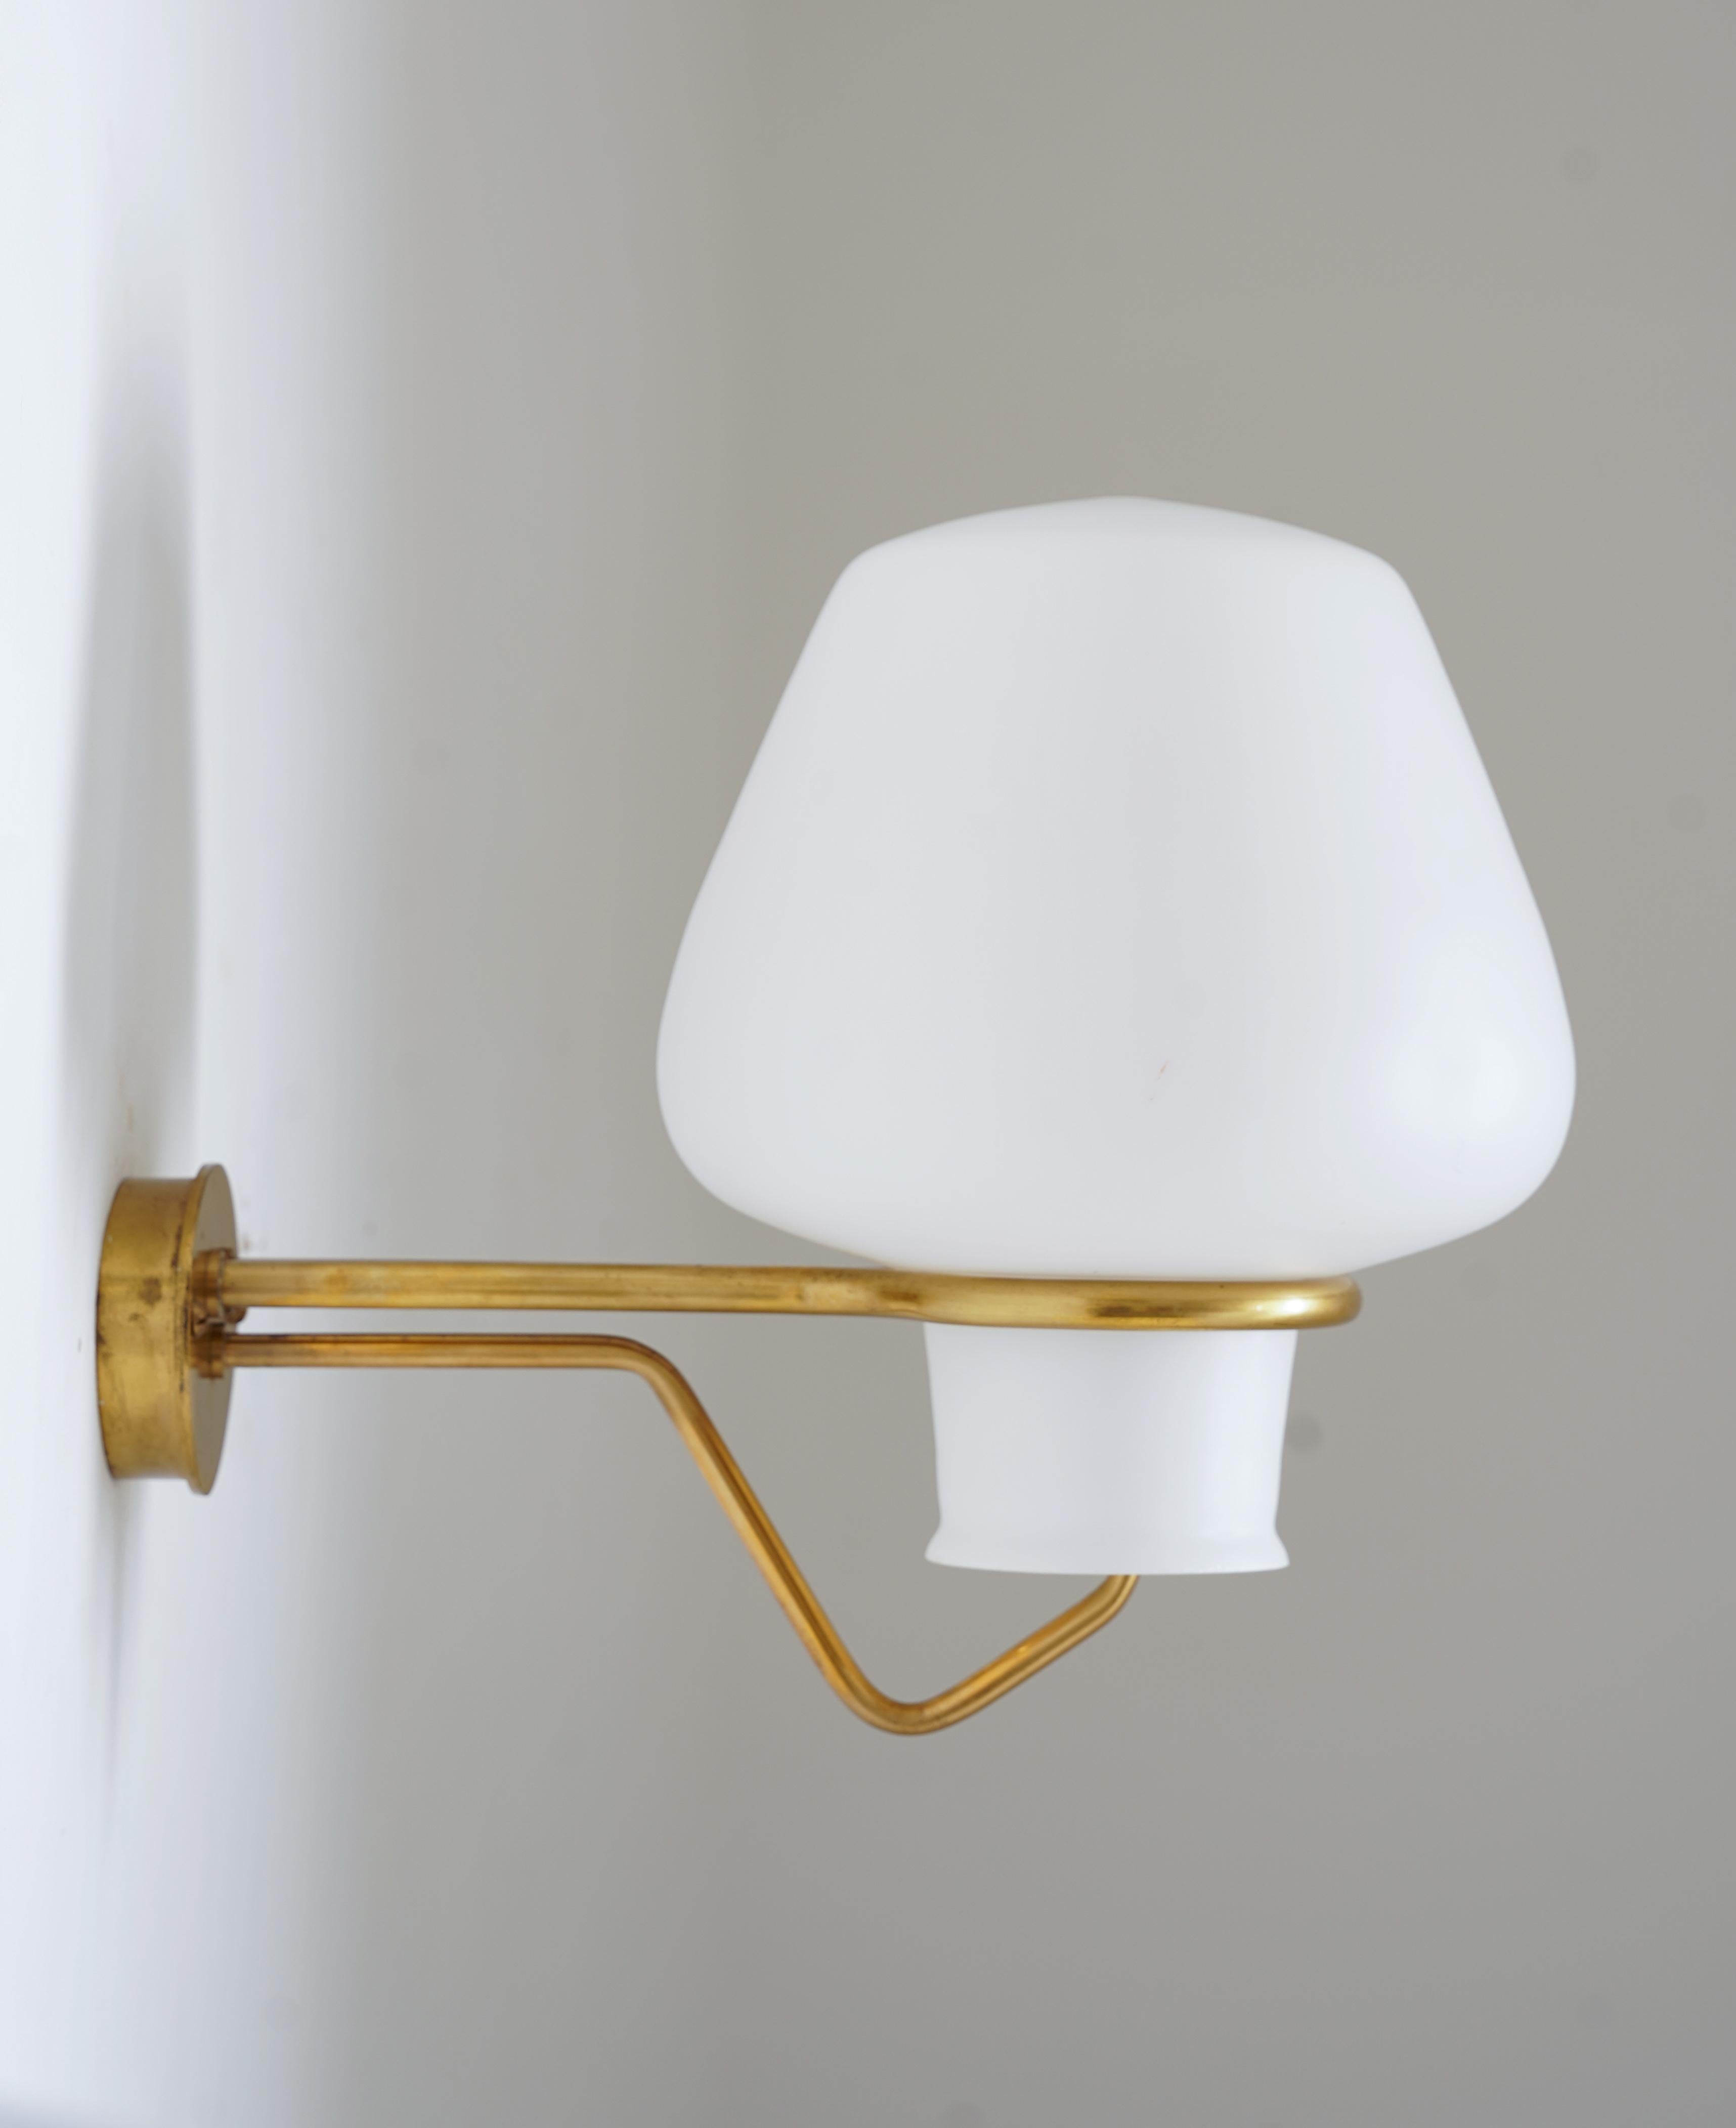 Large wall lamps by Gunnar Asplund for ASEA, 1950s.
These lamps feature a large frosted opaline glass shade, resting on a frame of brass.

Condition: Very good original condition with some scratches and spots on the brass. A chip on one of the